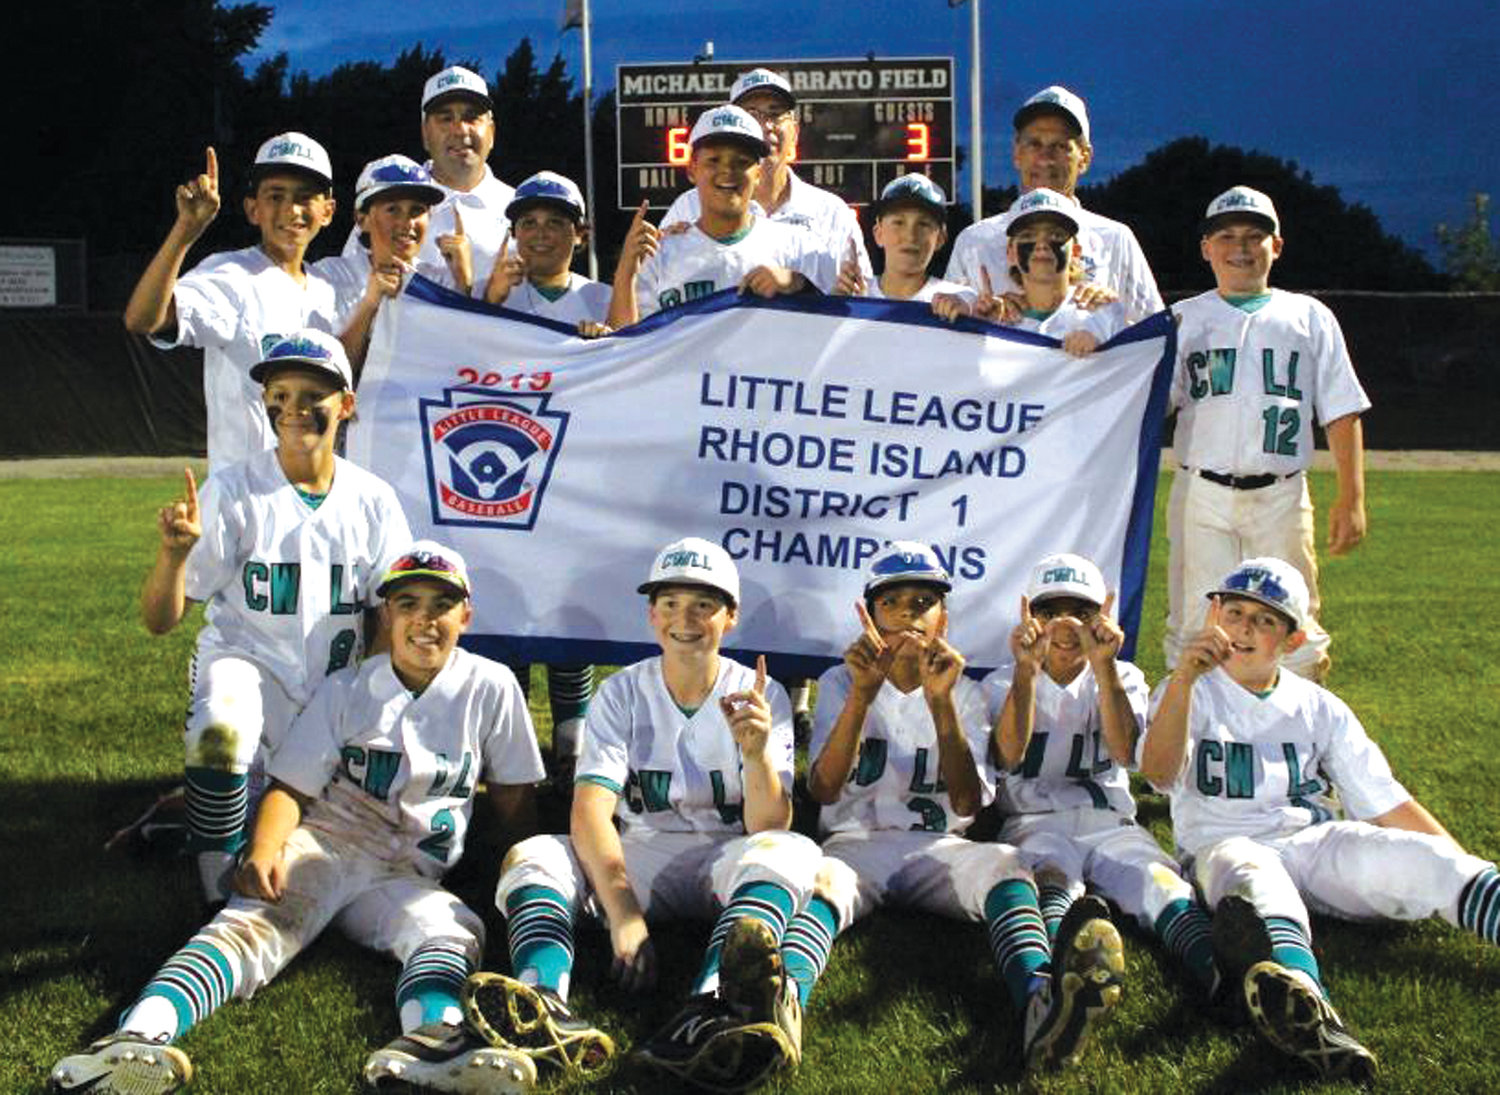 WE ARE THE CHAMPIONS: The Cranston Western 12’s after winning the District I title.